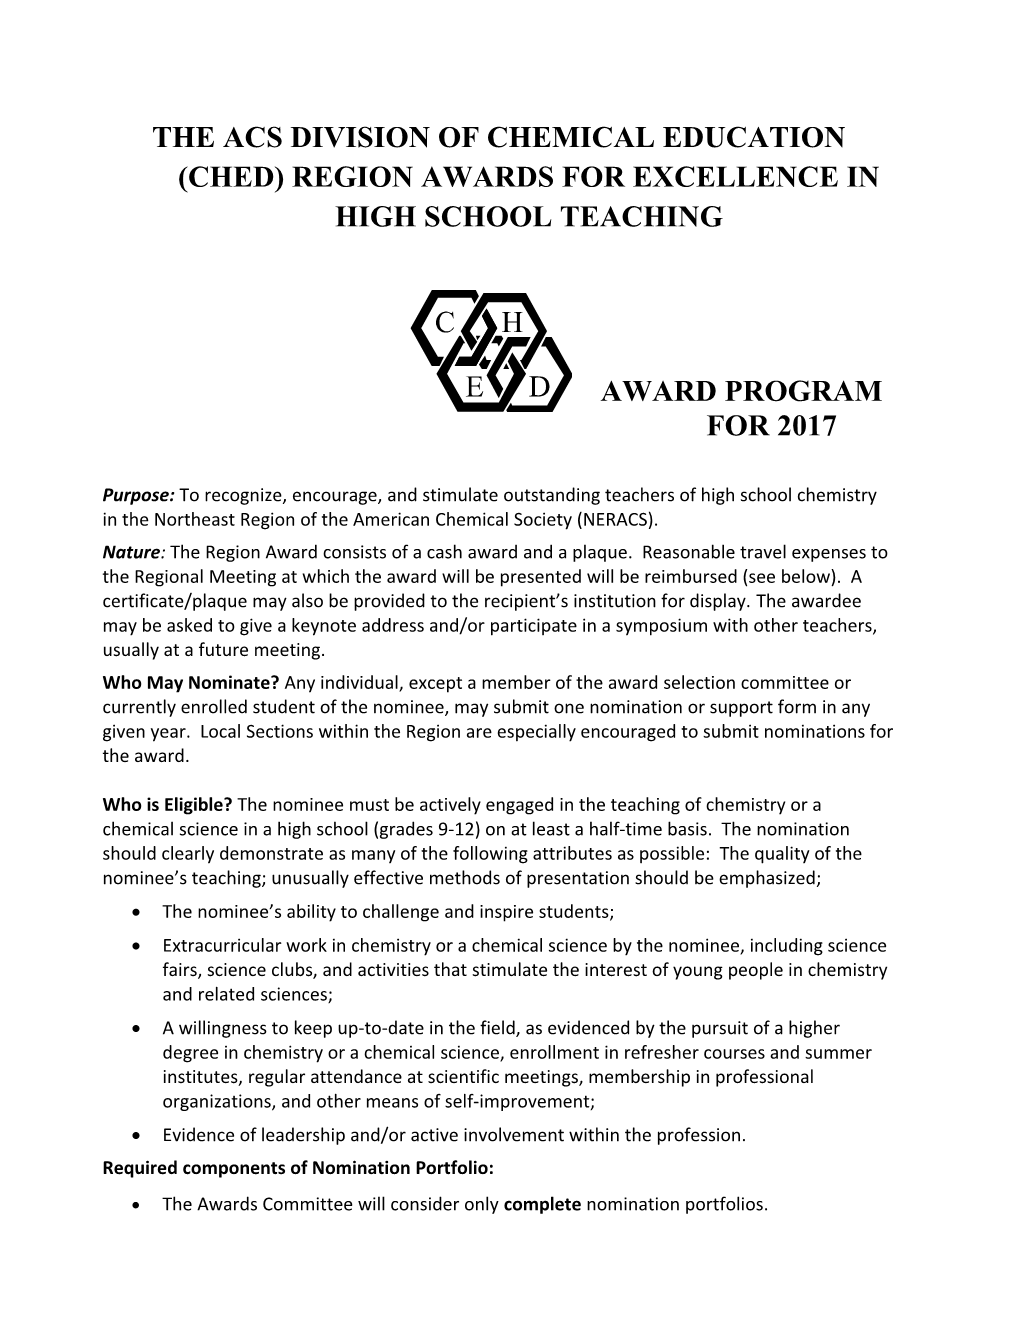 THE ACS DIVISION of CHEMICAL EDUCATION Name of Region REGION AWARD for EXCELLENCE in HIGH s1